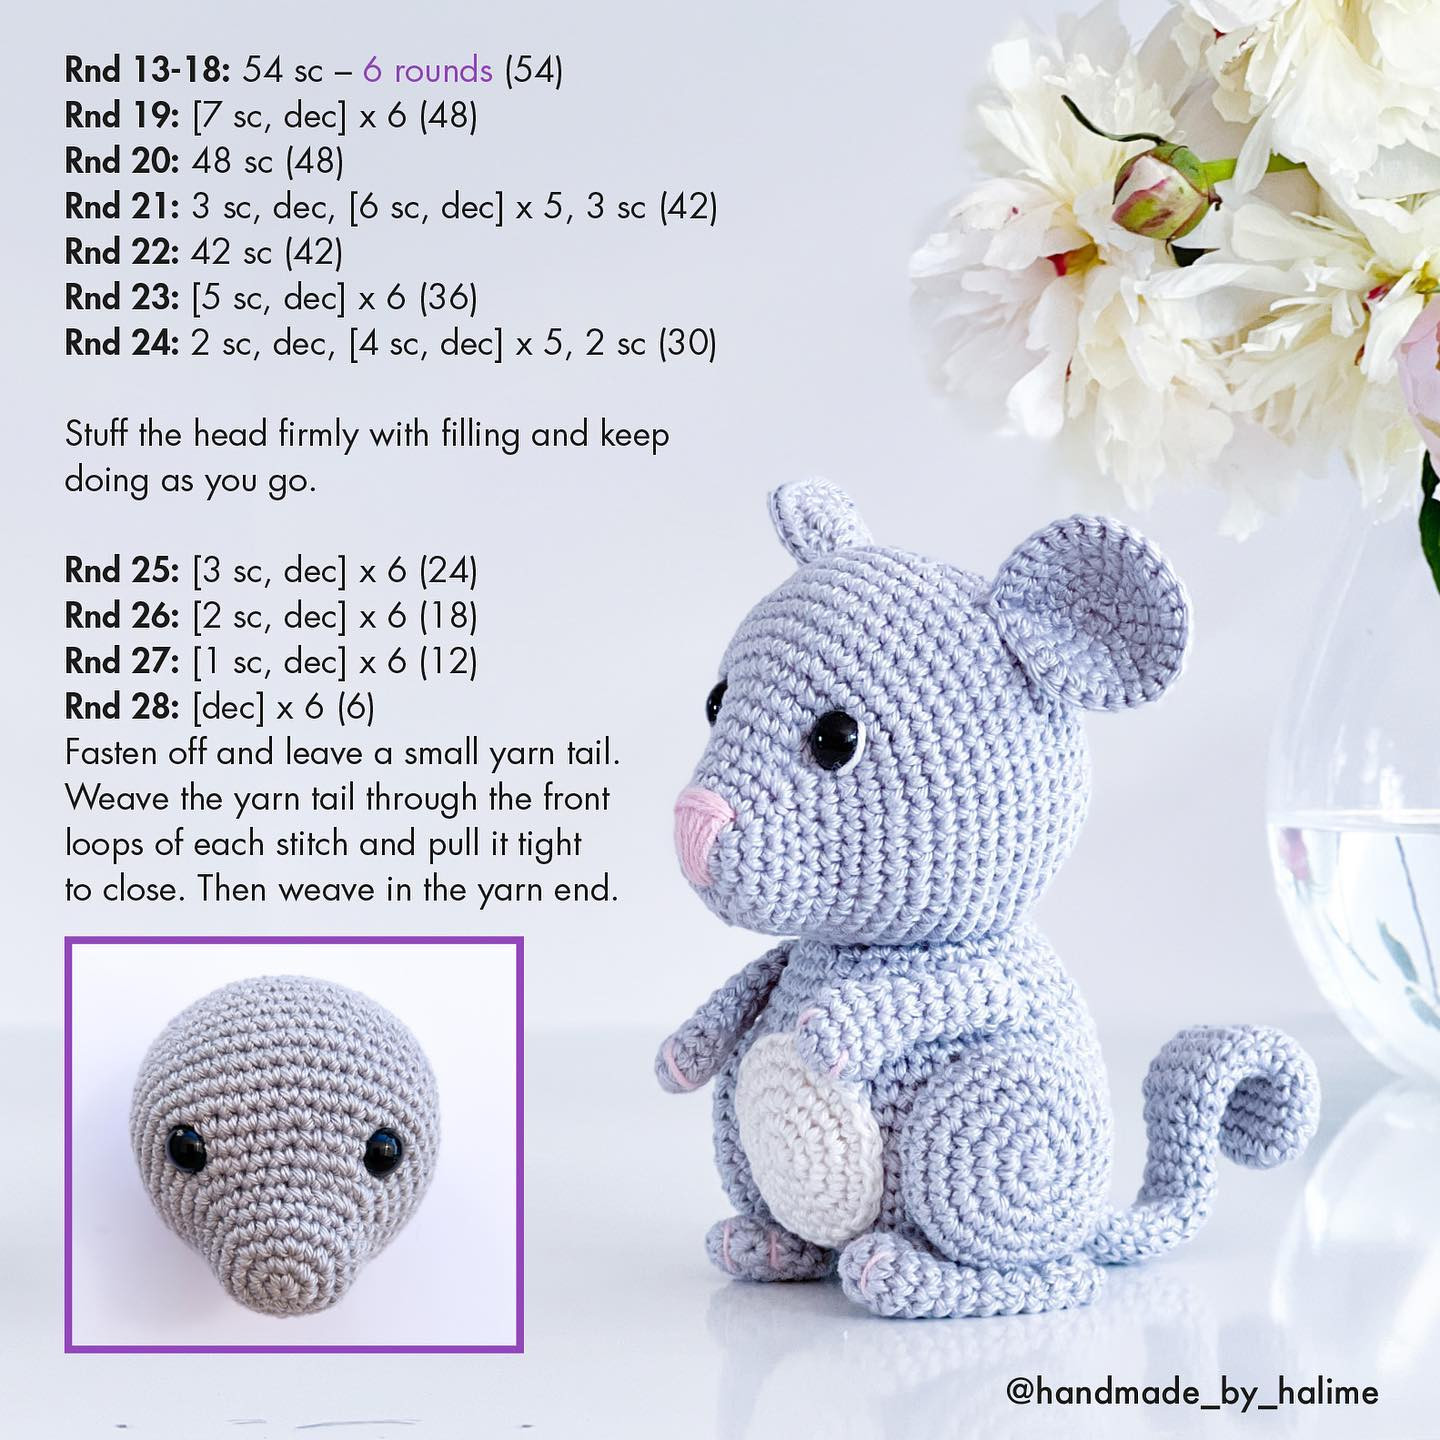 Gray and white belly crochet pattern